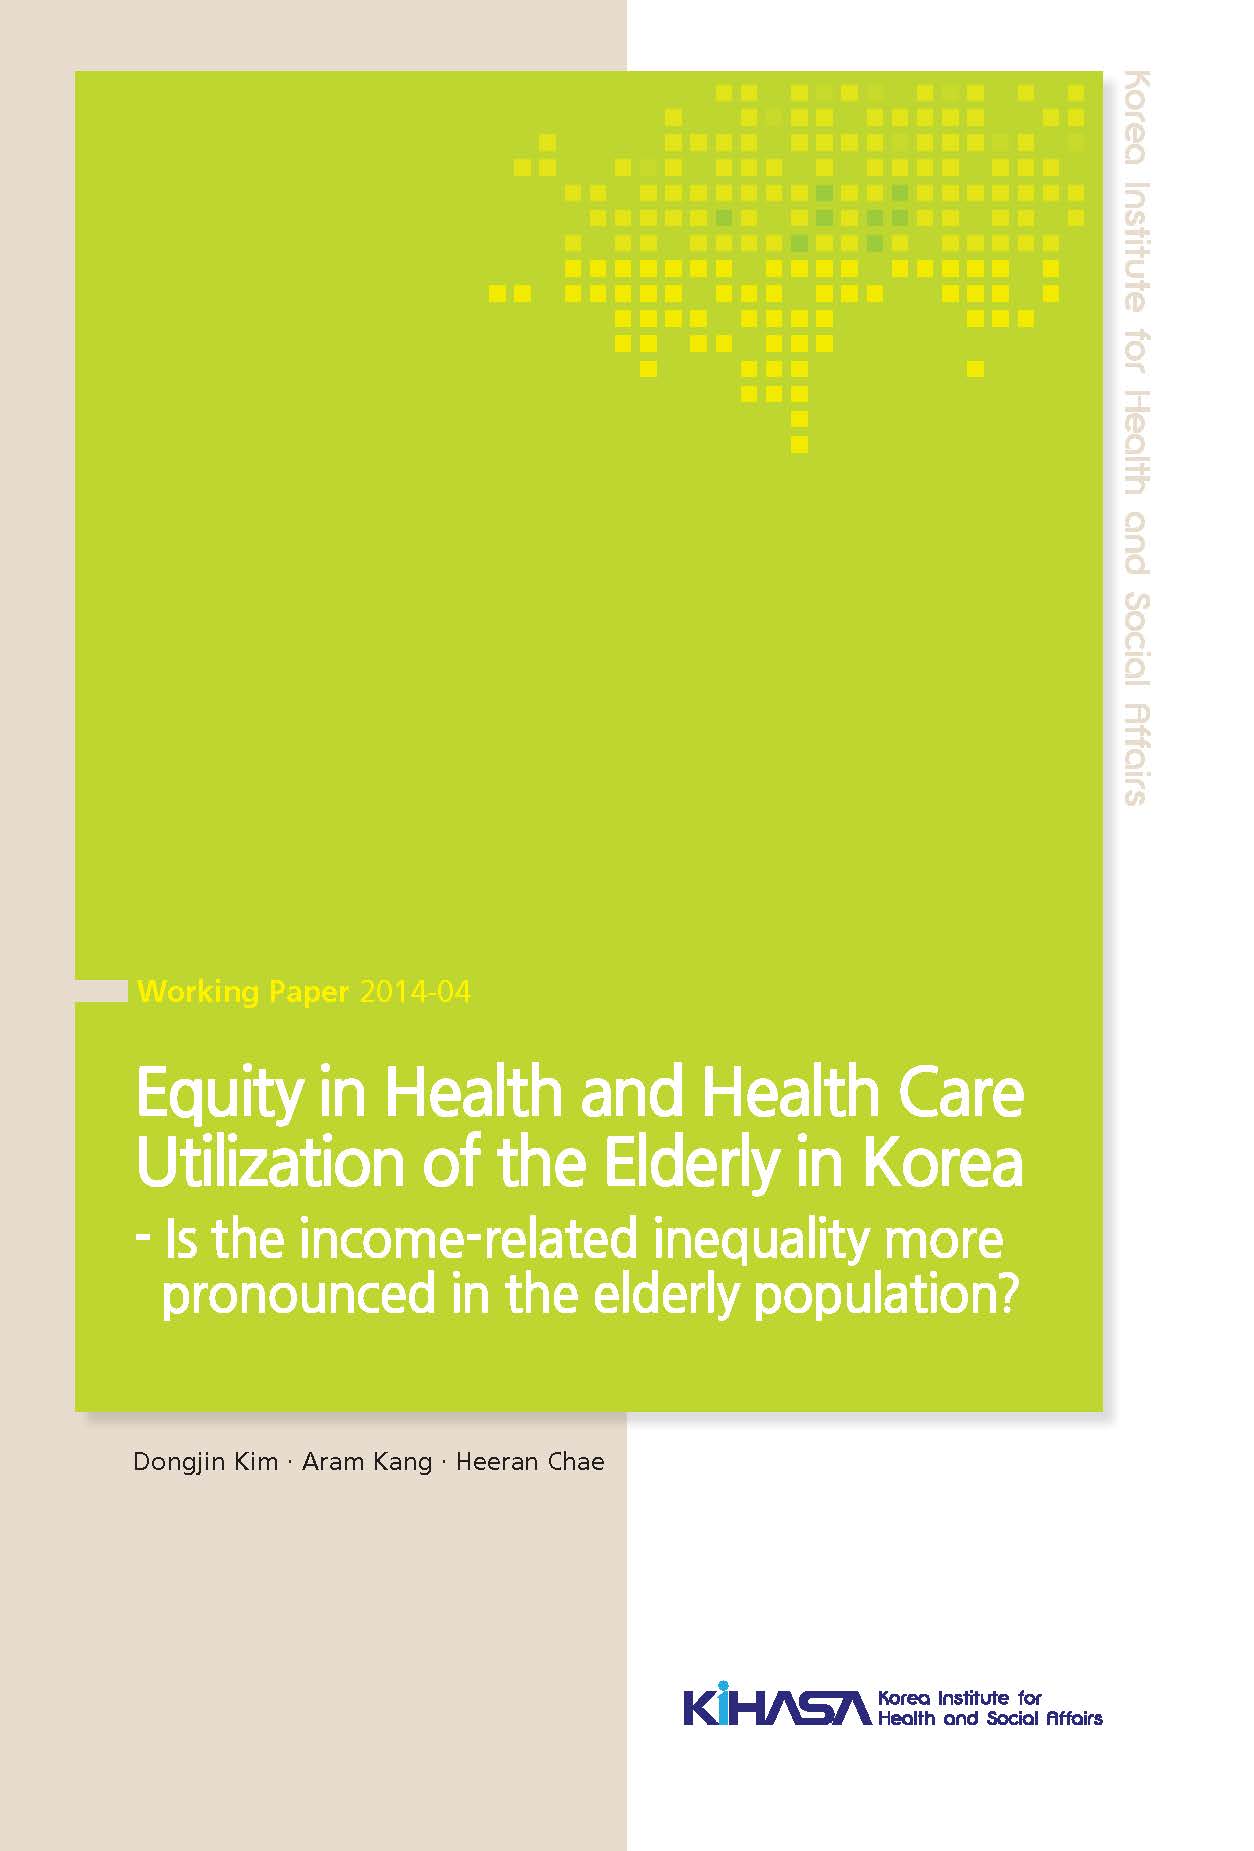 Equity in Health and Health Care Utilization of the Elderly in Korea